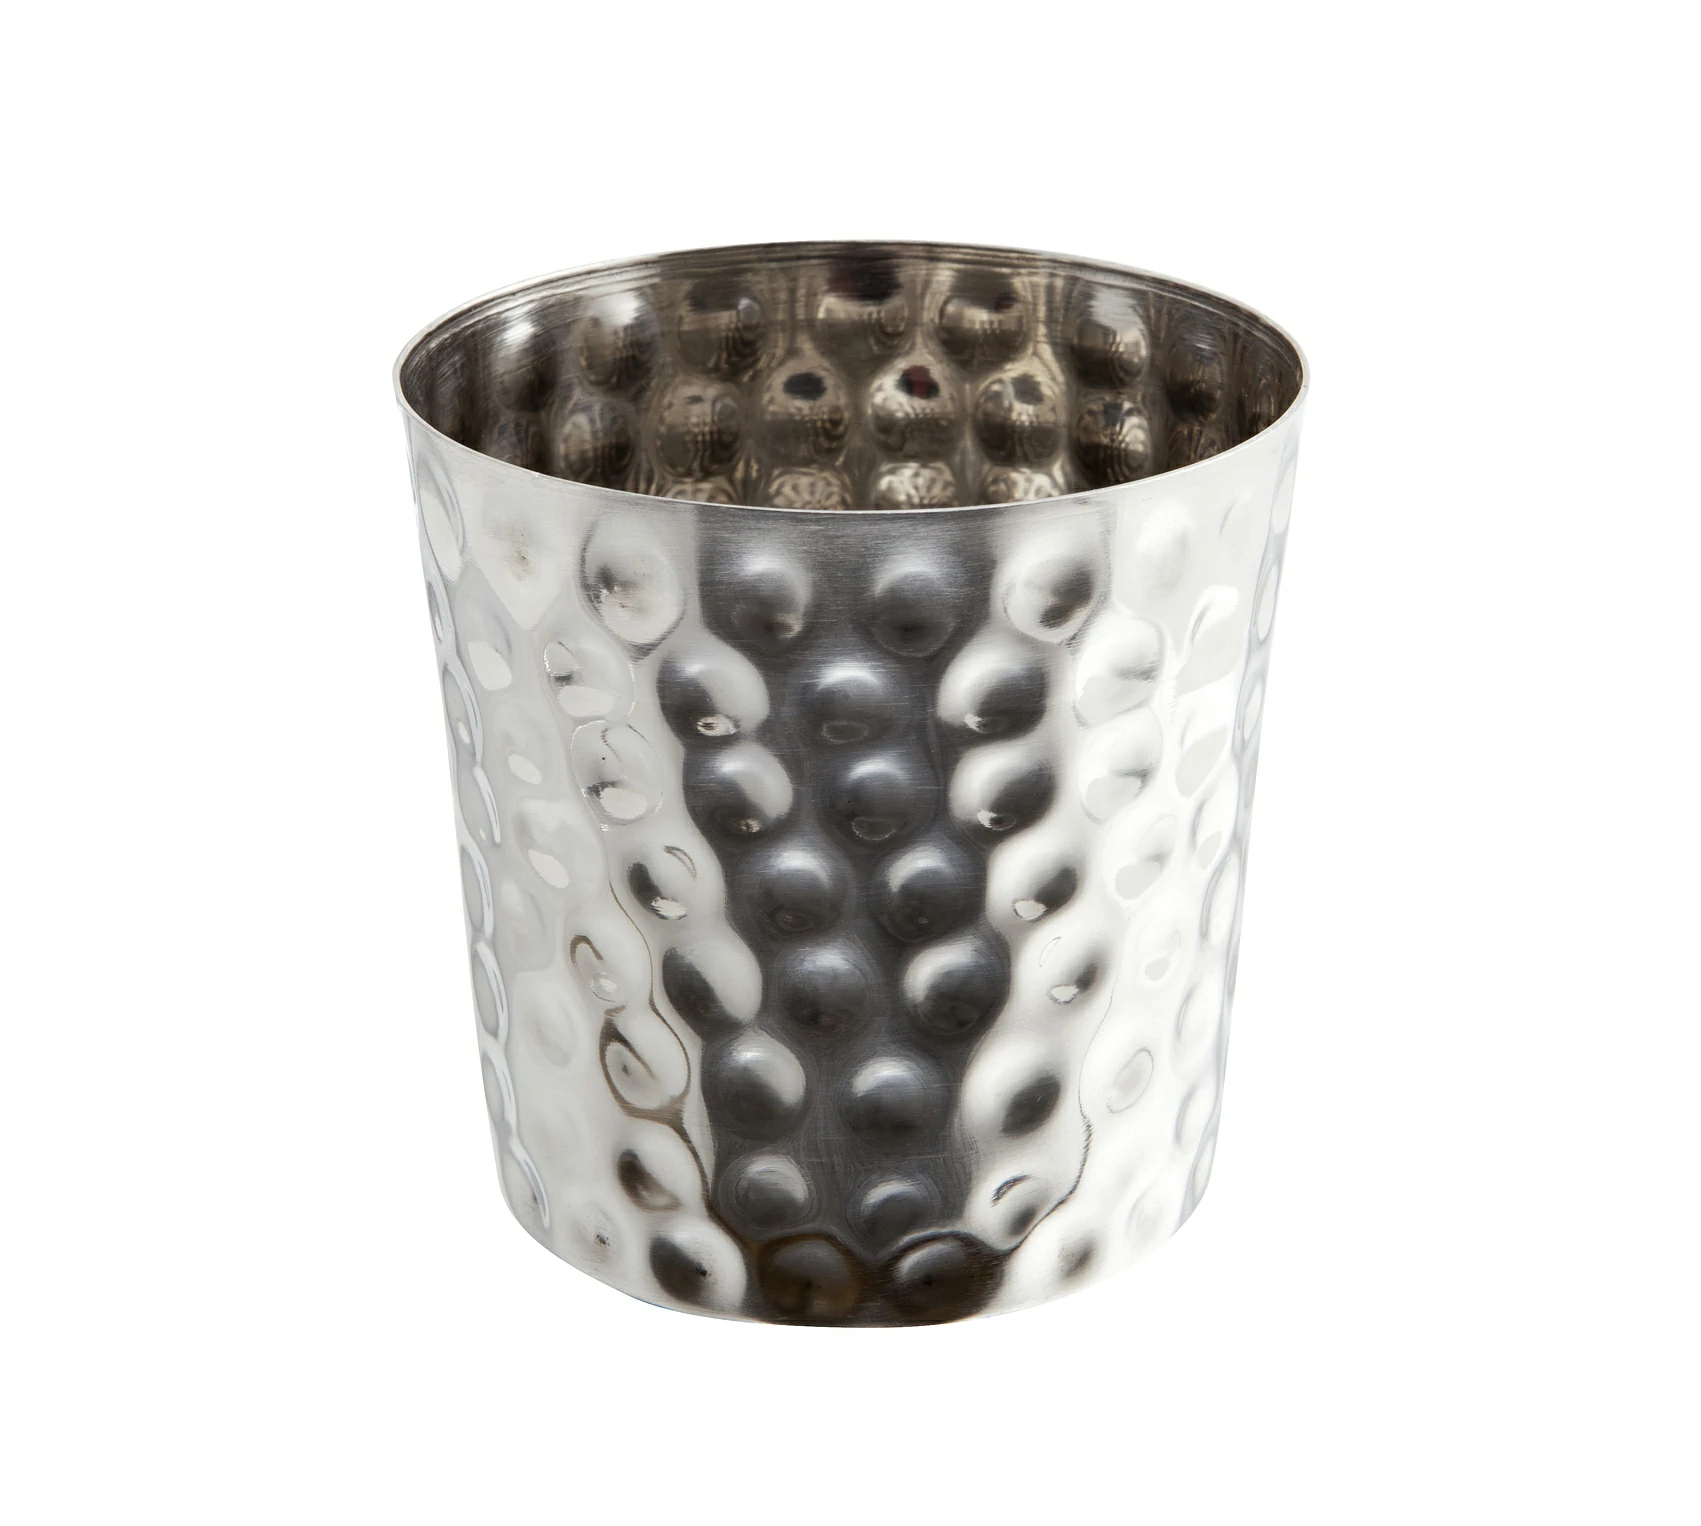 Hammered Stainless Steel Serving Cup 8.5 x 8.5cm